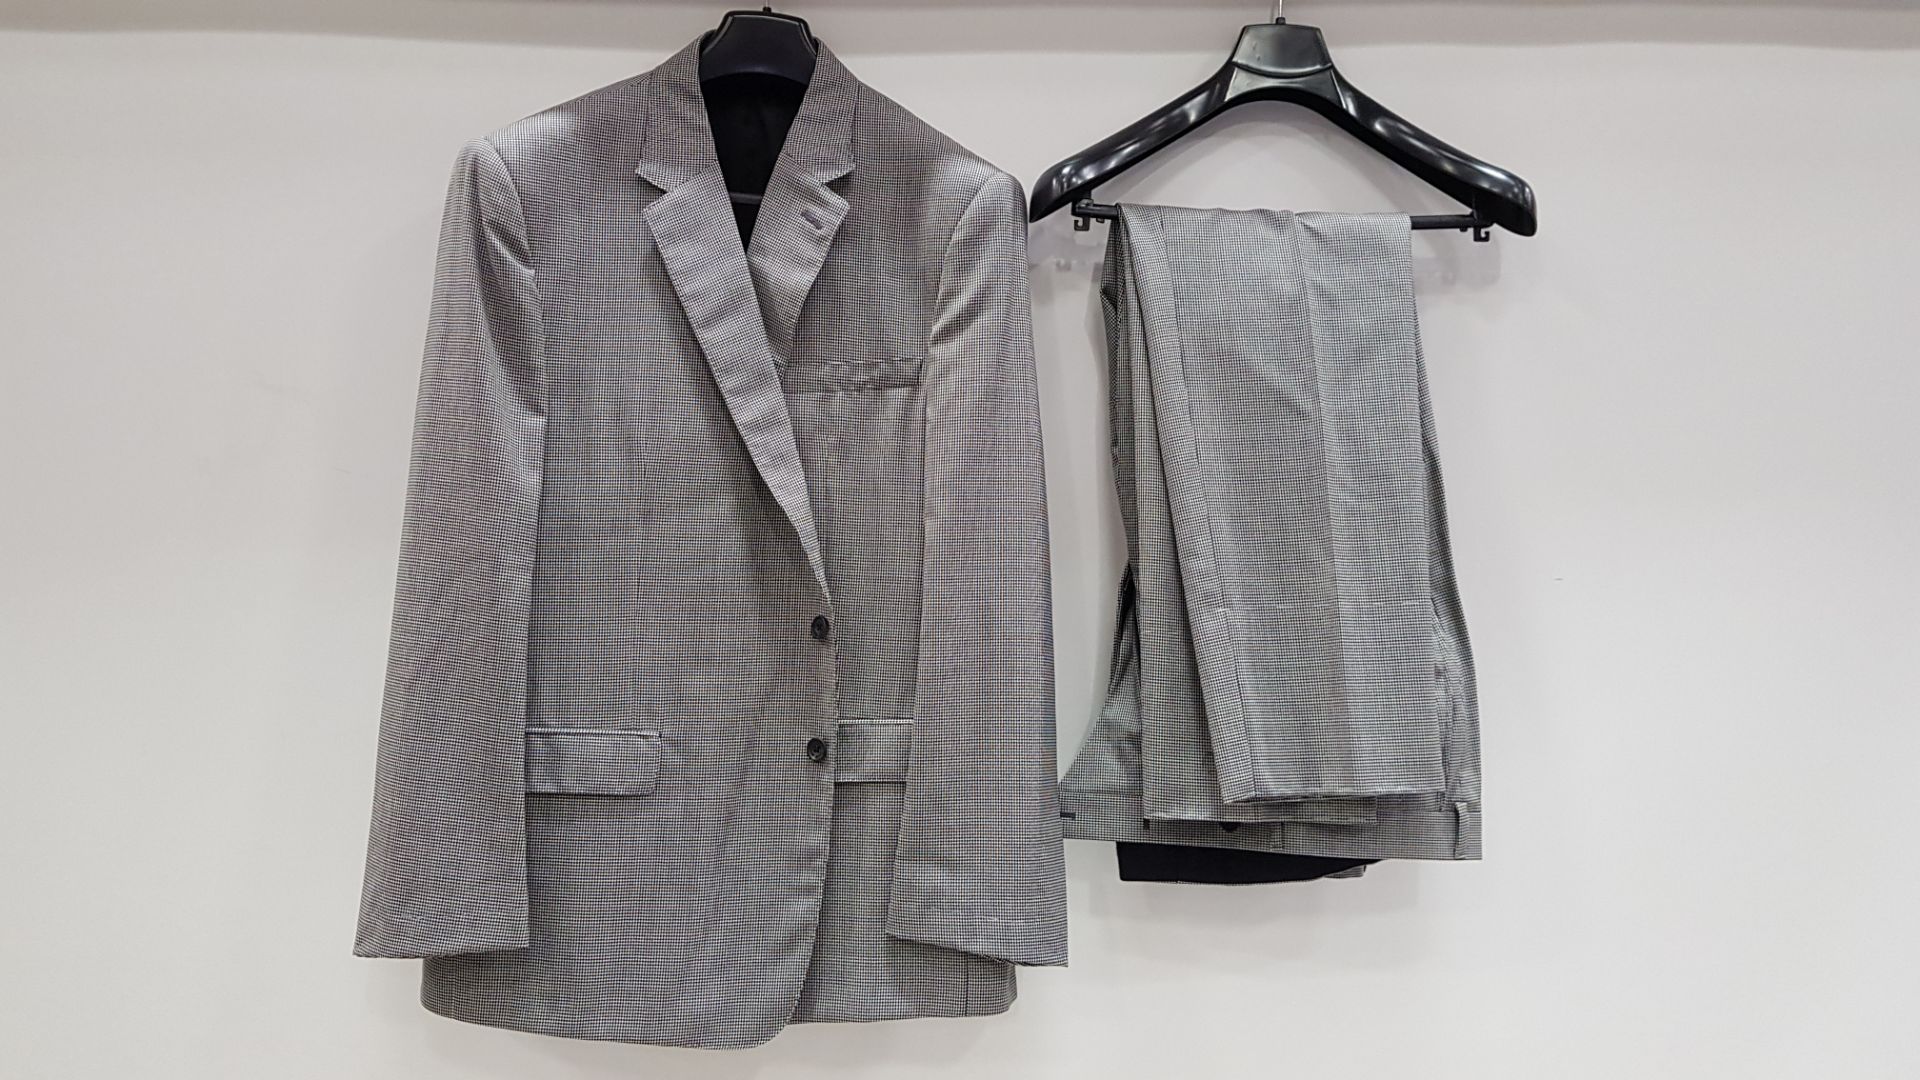 3 X BRAND NEW LUTWYCHE HAND TAILORED LIGHT GREY PATTERNED SUITS SIZE 38L AND 42R (PLEASE NOTE